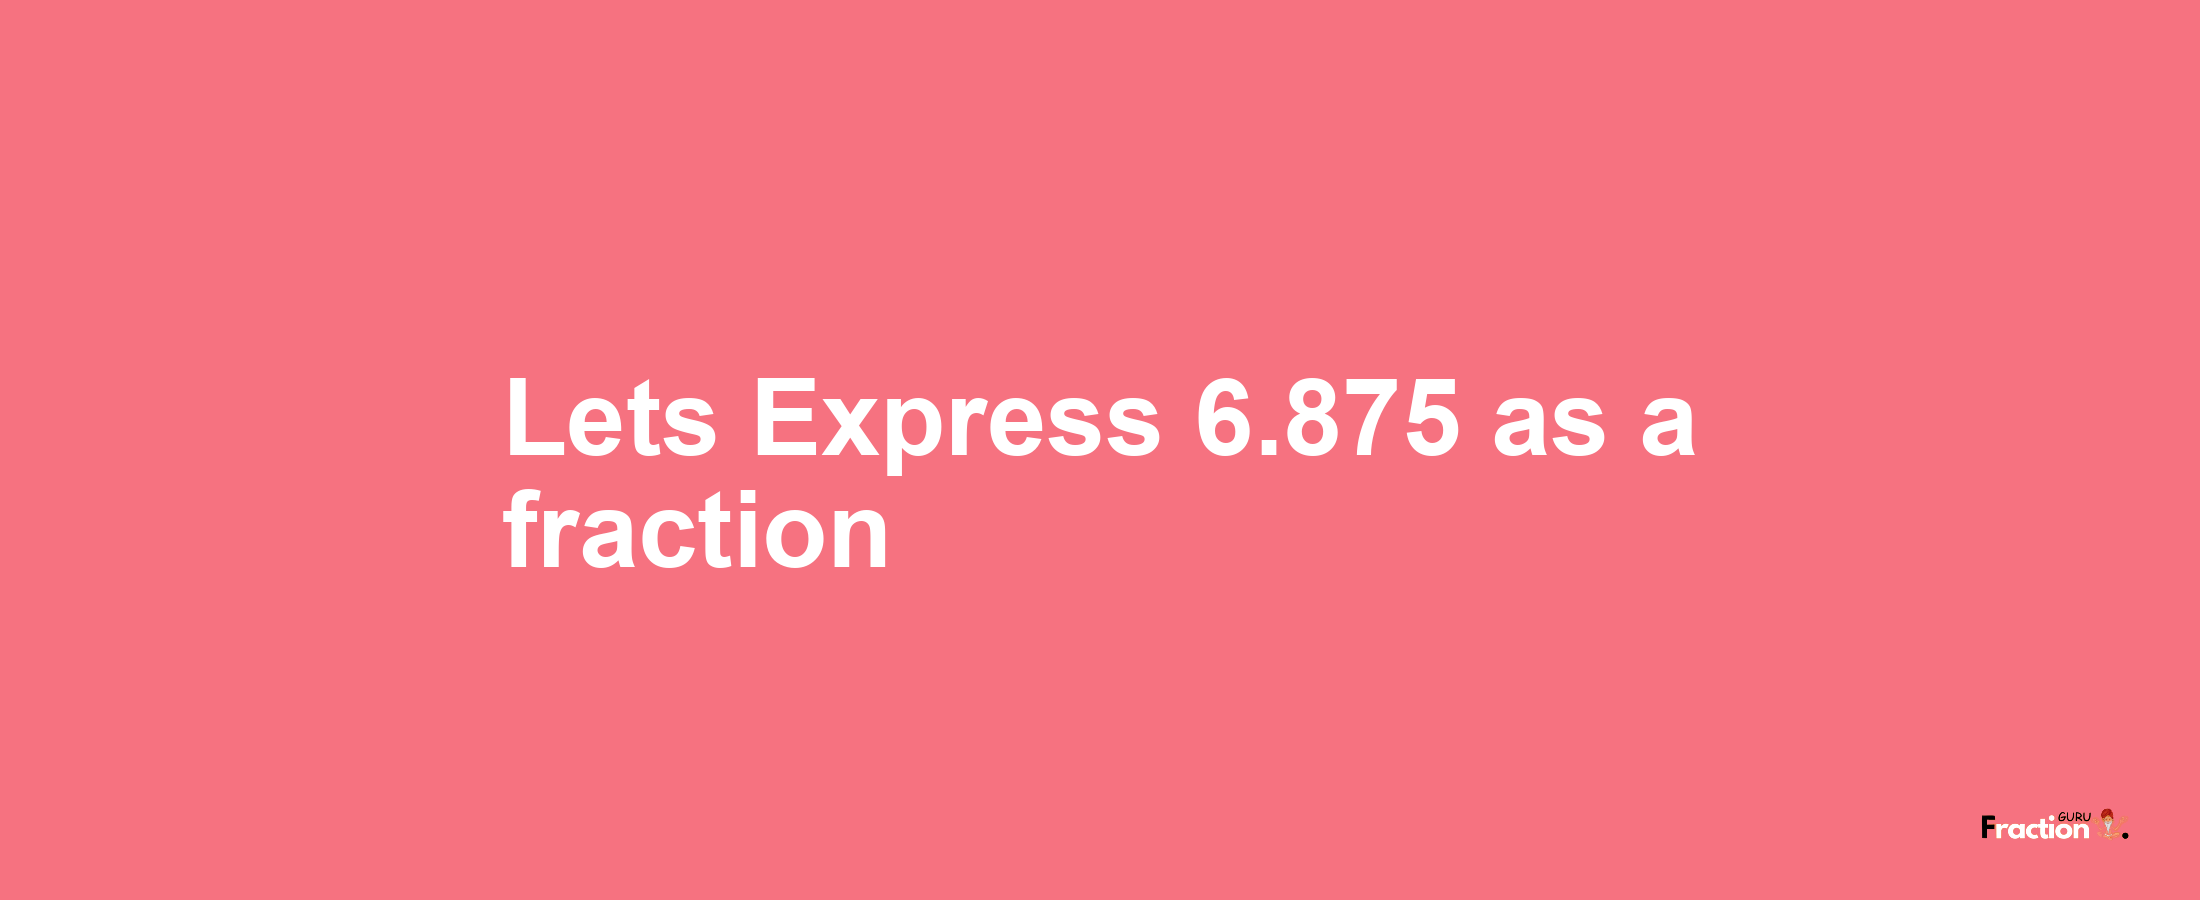 Lets Express 6.875 as afraction